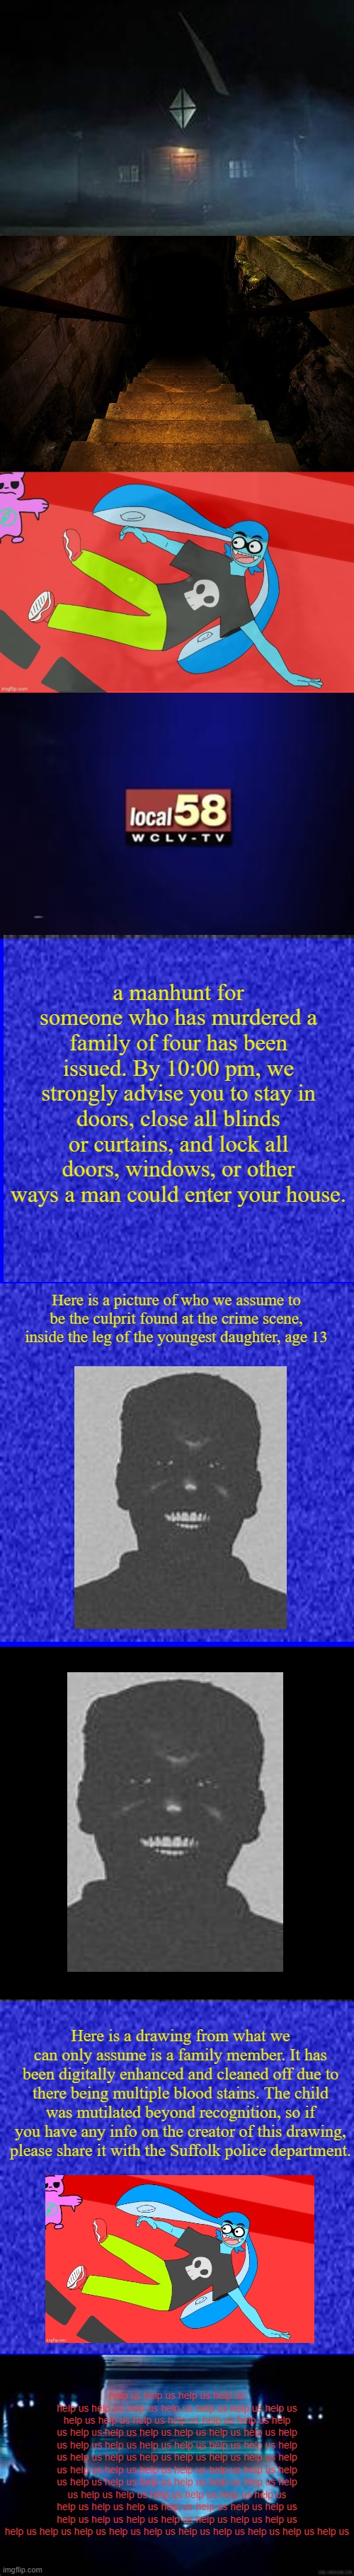 another awful meme-to-analog horror image. This time with Natthegoofyahhmew's image. | a manhunt for someone who has murdered a family of four has been issued. By 10:00 pm, we strongly advise you to stay in doors, close all blinds or curtains, and lock all doors, windows, or other ways a man could enter your house. Here is a picture of who we assume to be the culprit found at the crime scene, inside the leg of the youngest daughter, age 13; Here is a drawing from what we can only assume is a family member. It has been digitally enhanced and cleaned off due to there being multiple blood stains. The child was mutilated beyond recognition, so if you have any info on the creator of this drawing, please share it with the Suffolk police department. help us help us help us help us help us help us help us help us help us help us help us help us help us help us help us help us help us help us help us help us help us help us help us help us help us help us help us help us help us help us help us help us help us help us help us help us help us help us help us help us help us help us help us help us help us help us help us help us help us help us help us help us help us help us help us help us help us help us help us help us help us help us help us help us help us help us help us help us help us help us help us help us help us help us help us help us help us help us help us help us help us help us help us | image tagged in blue square,black square | made w/ Imgflip meme maker